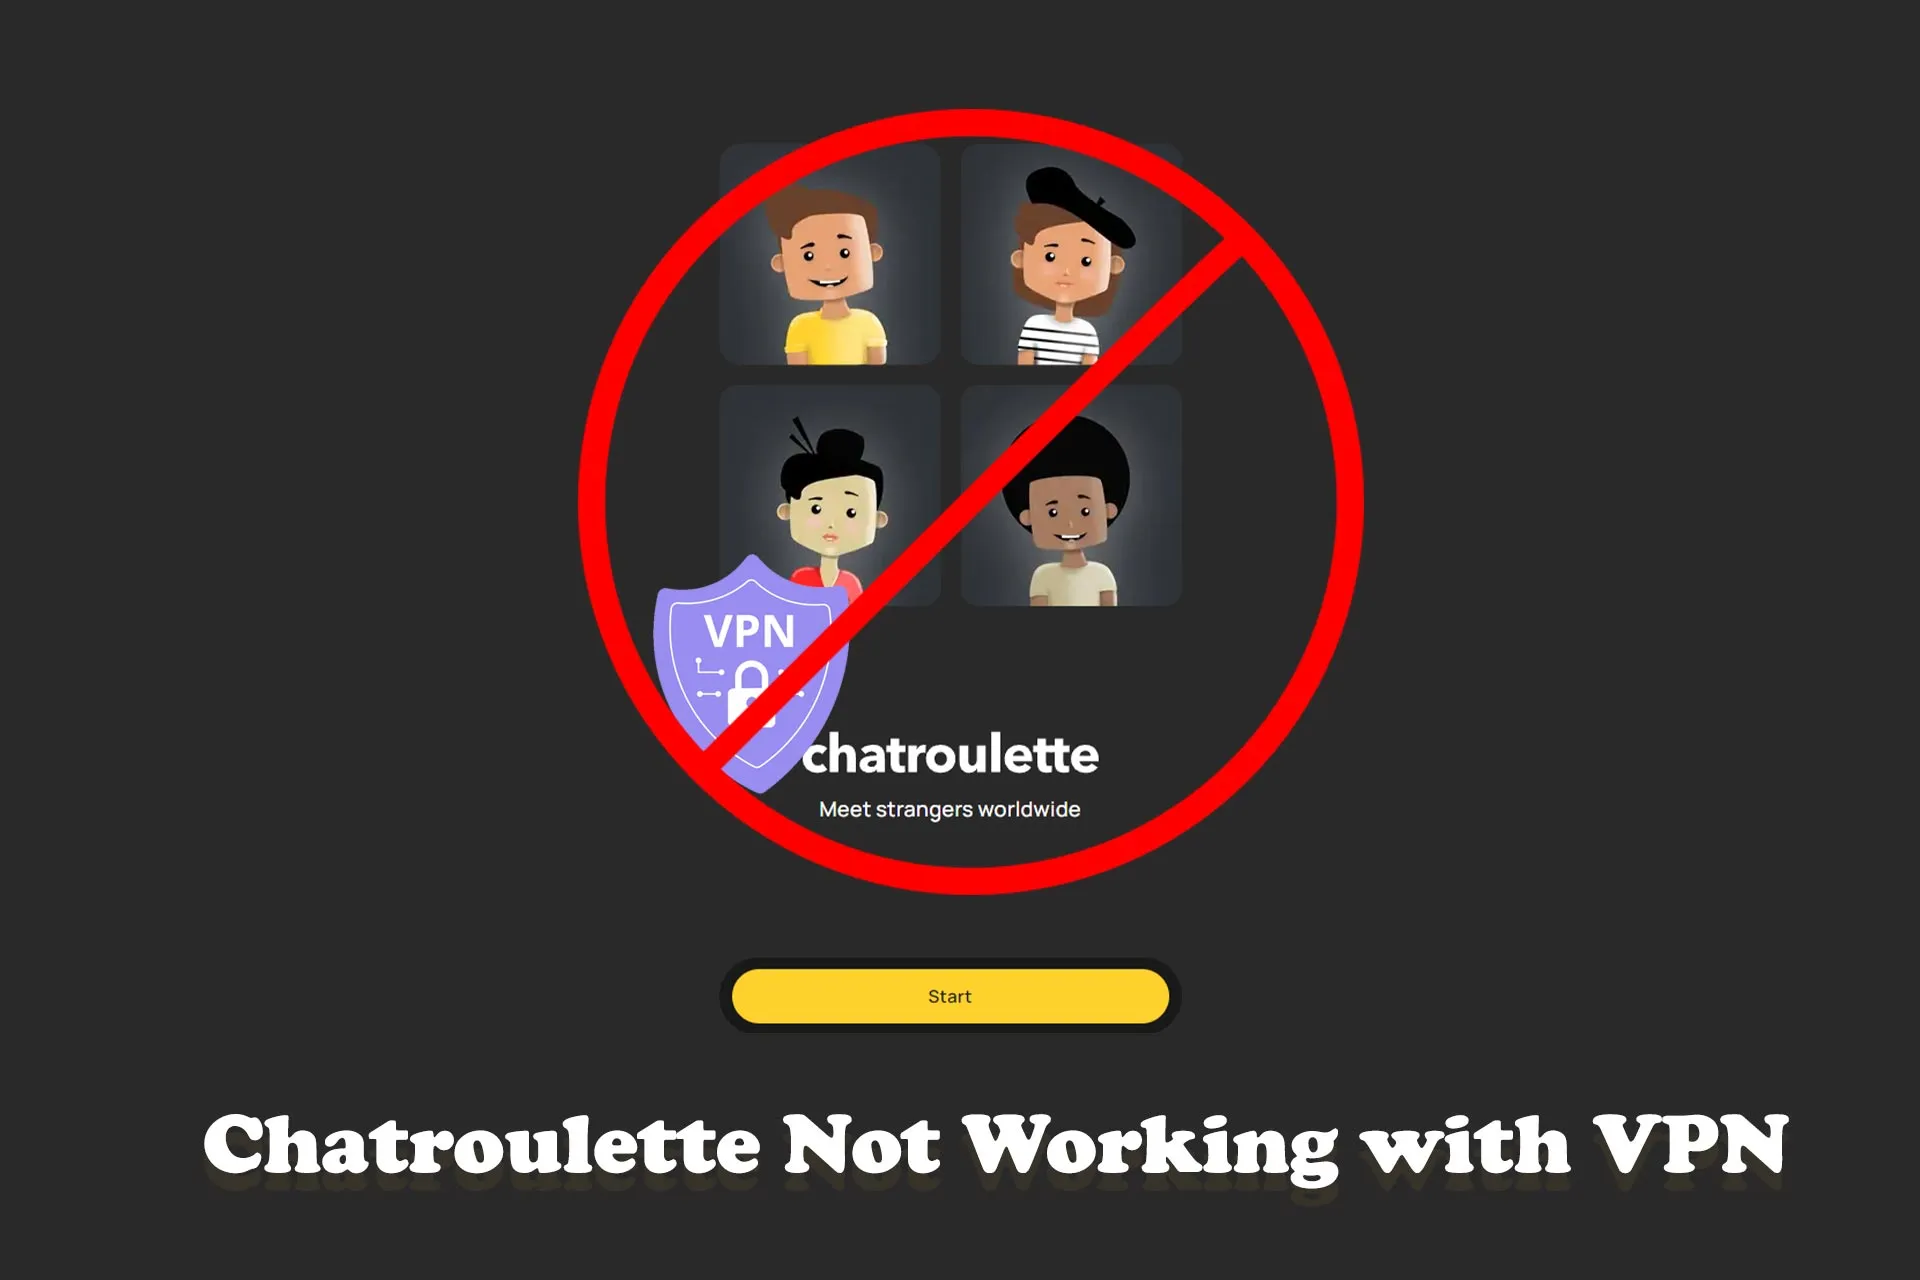 Chatroulette Not Working with VPN